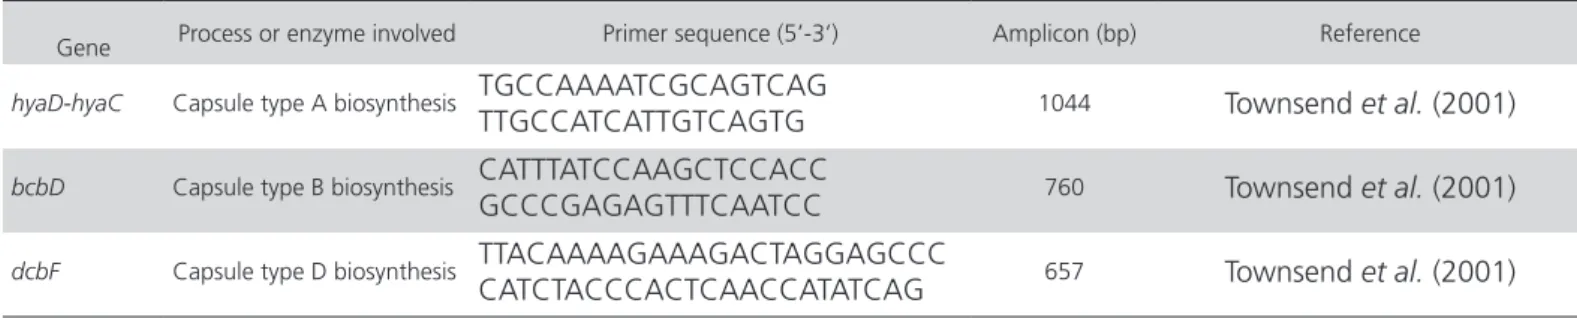 Table 1 - The capsule genes selected, the processes in which they are involved, primer sequences and amplicon sizes.